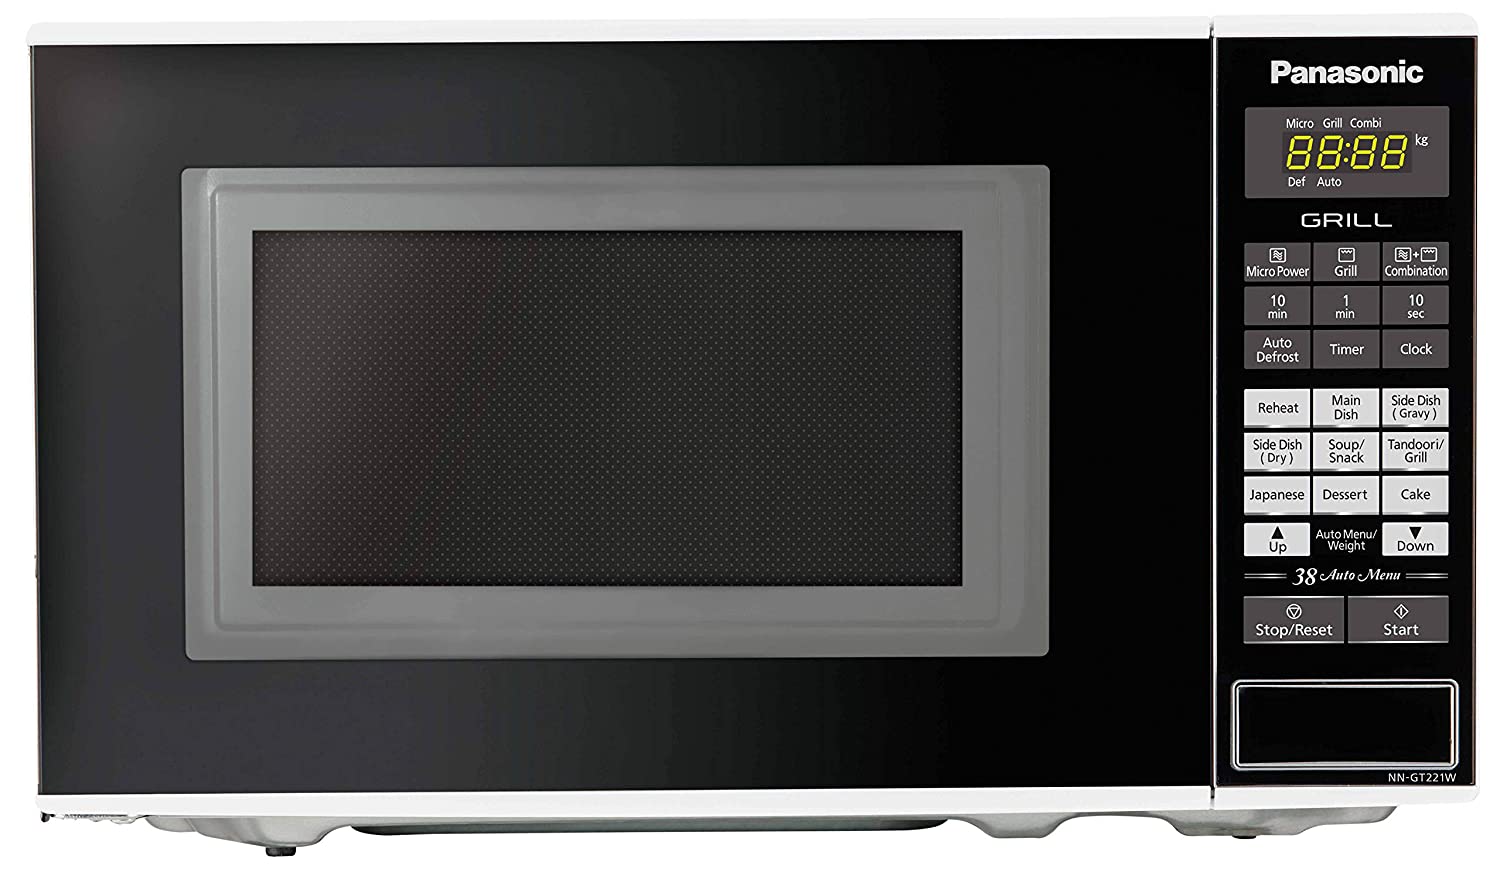 Panasonic 20L Grill Microwave Oven